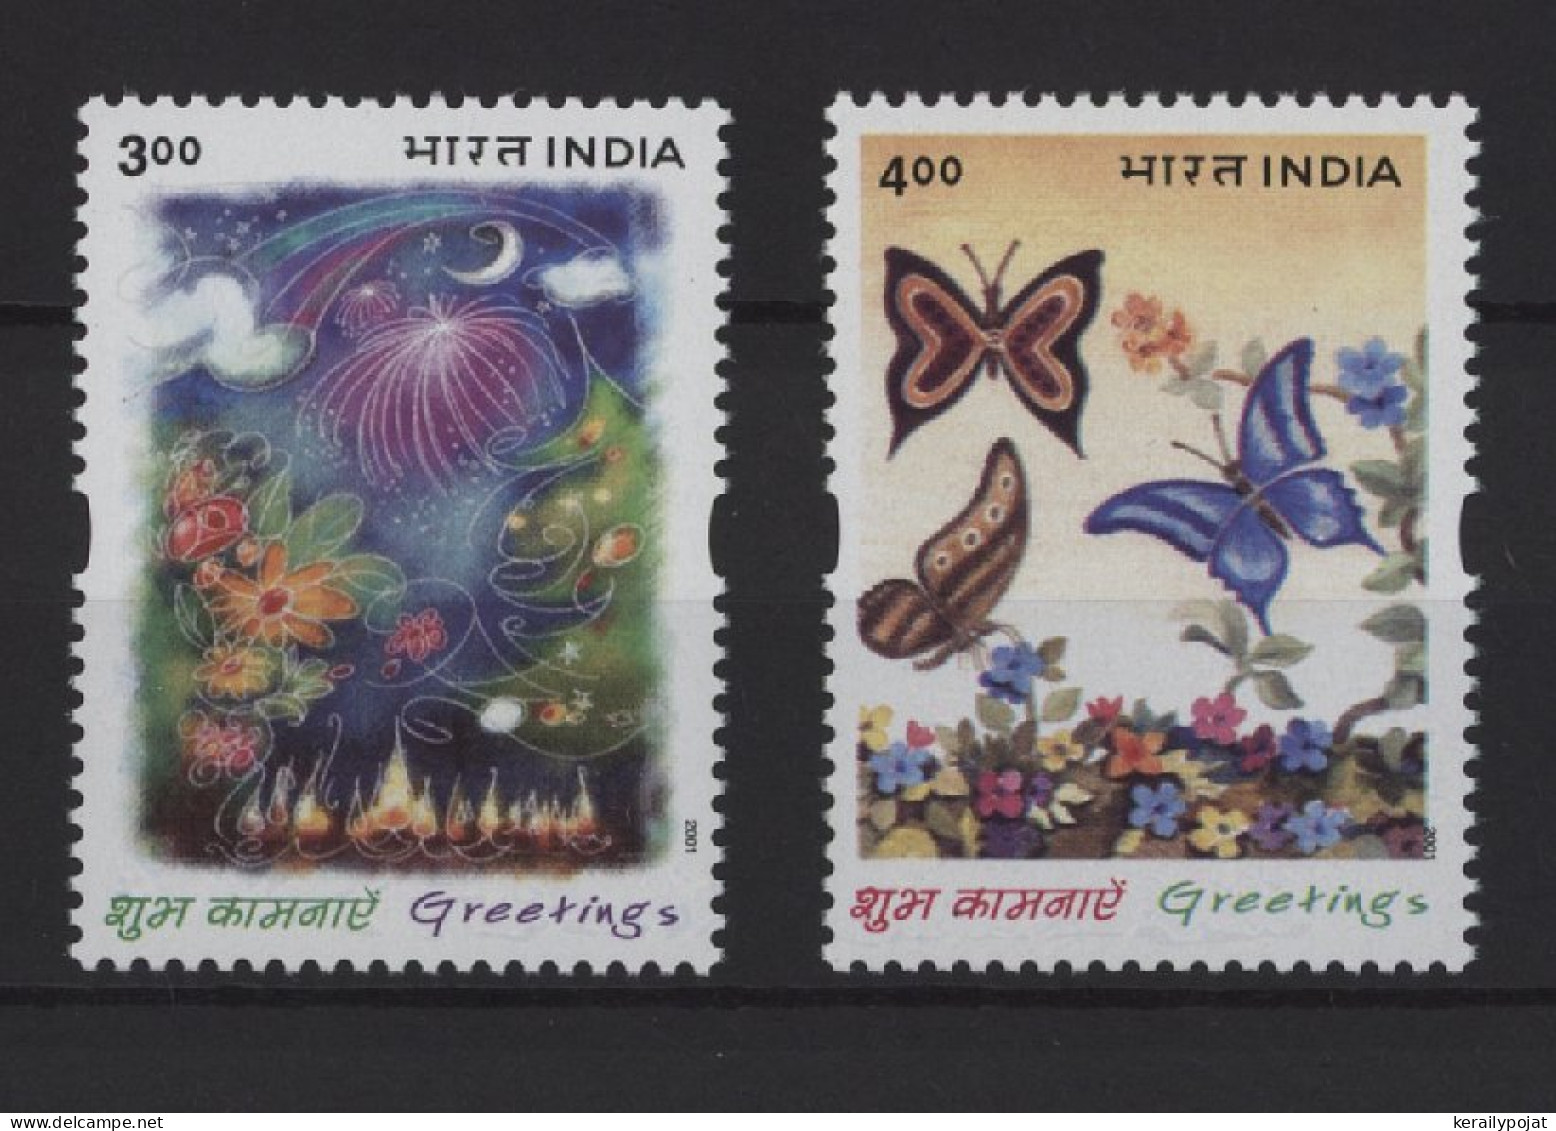 India - 2001 Greeting Stamps MNH__(TH-26891) - Ungebraucht